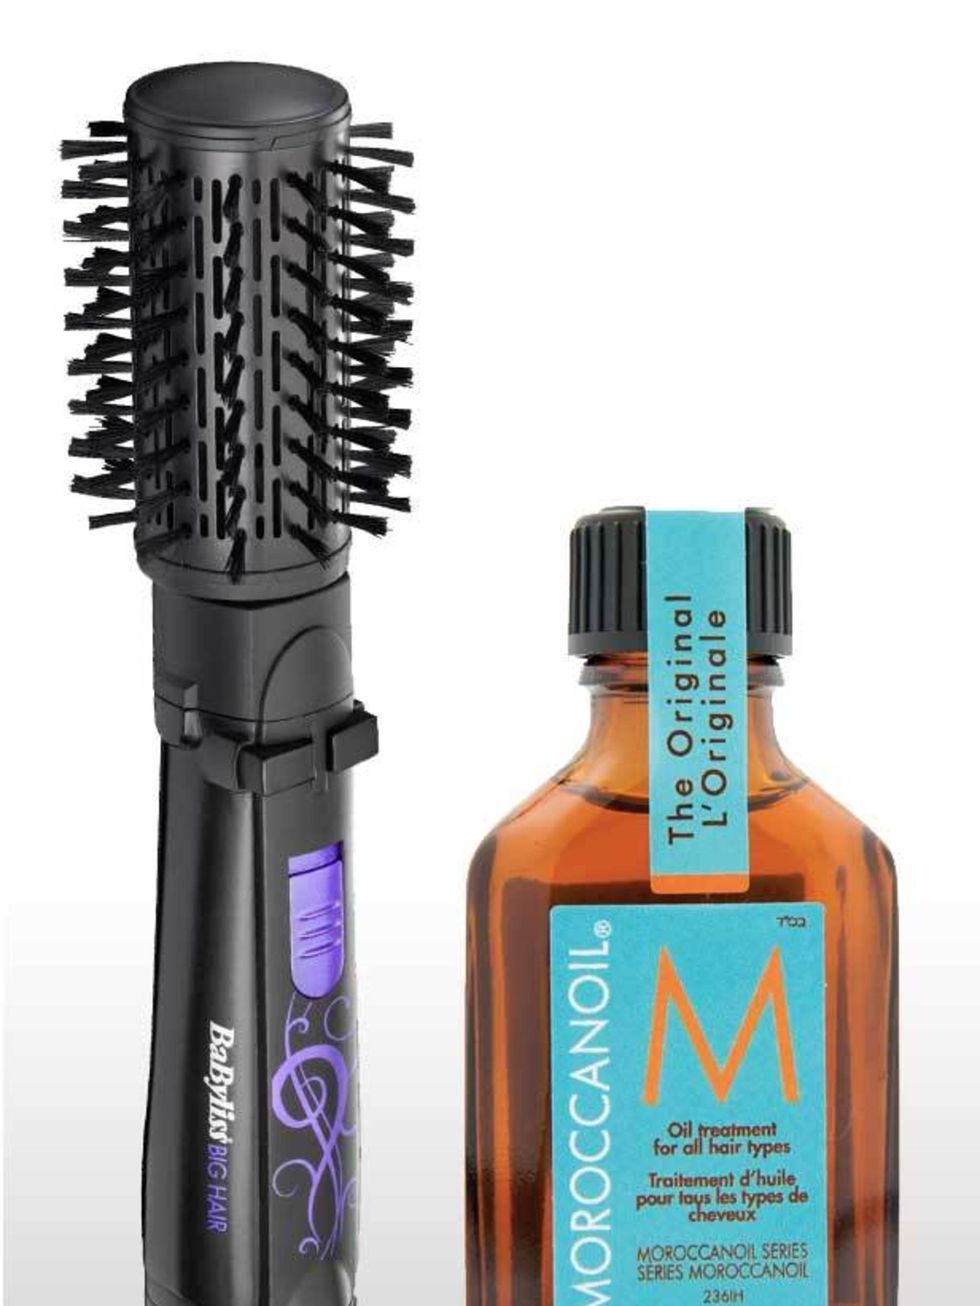 <p>Wind, humidity and rain will make hair limp. Give it at least a fighting chance by blowdrying with BaByliss Big Hair, £45, before heading out. The heated air from inside the barrel brush gives root lift that lasts all day. For instant results, carry Ma